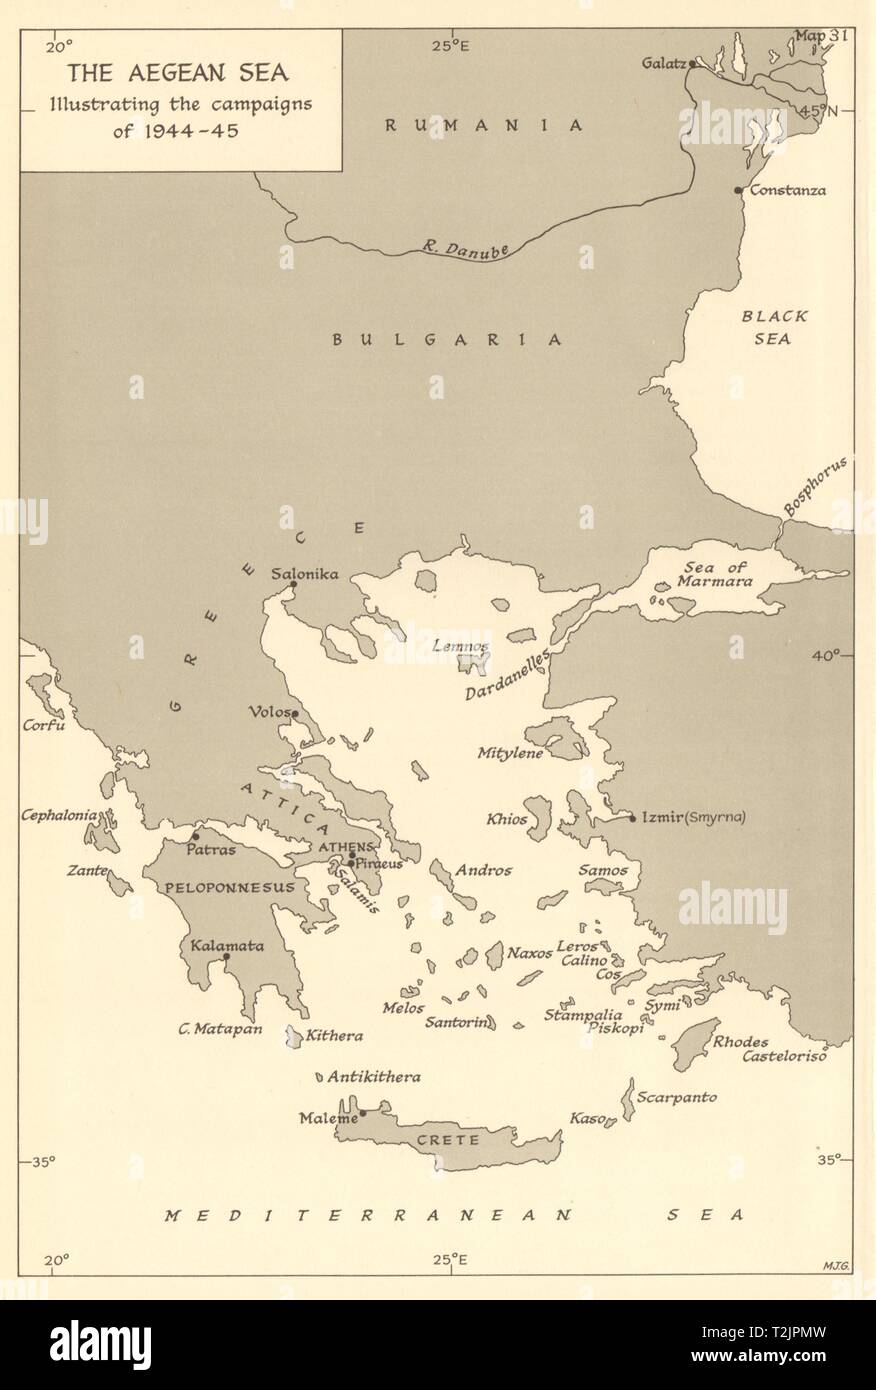 Aegean Sea illustrating the naval campaigns of 1944-45. World War 2 1961 map Stock Photo